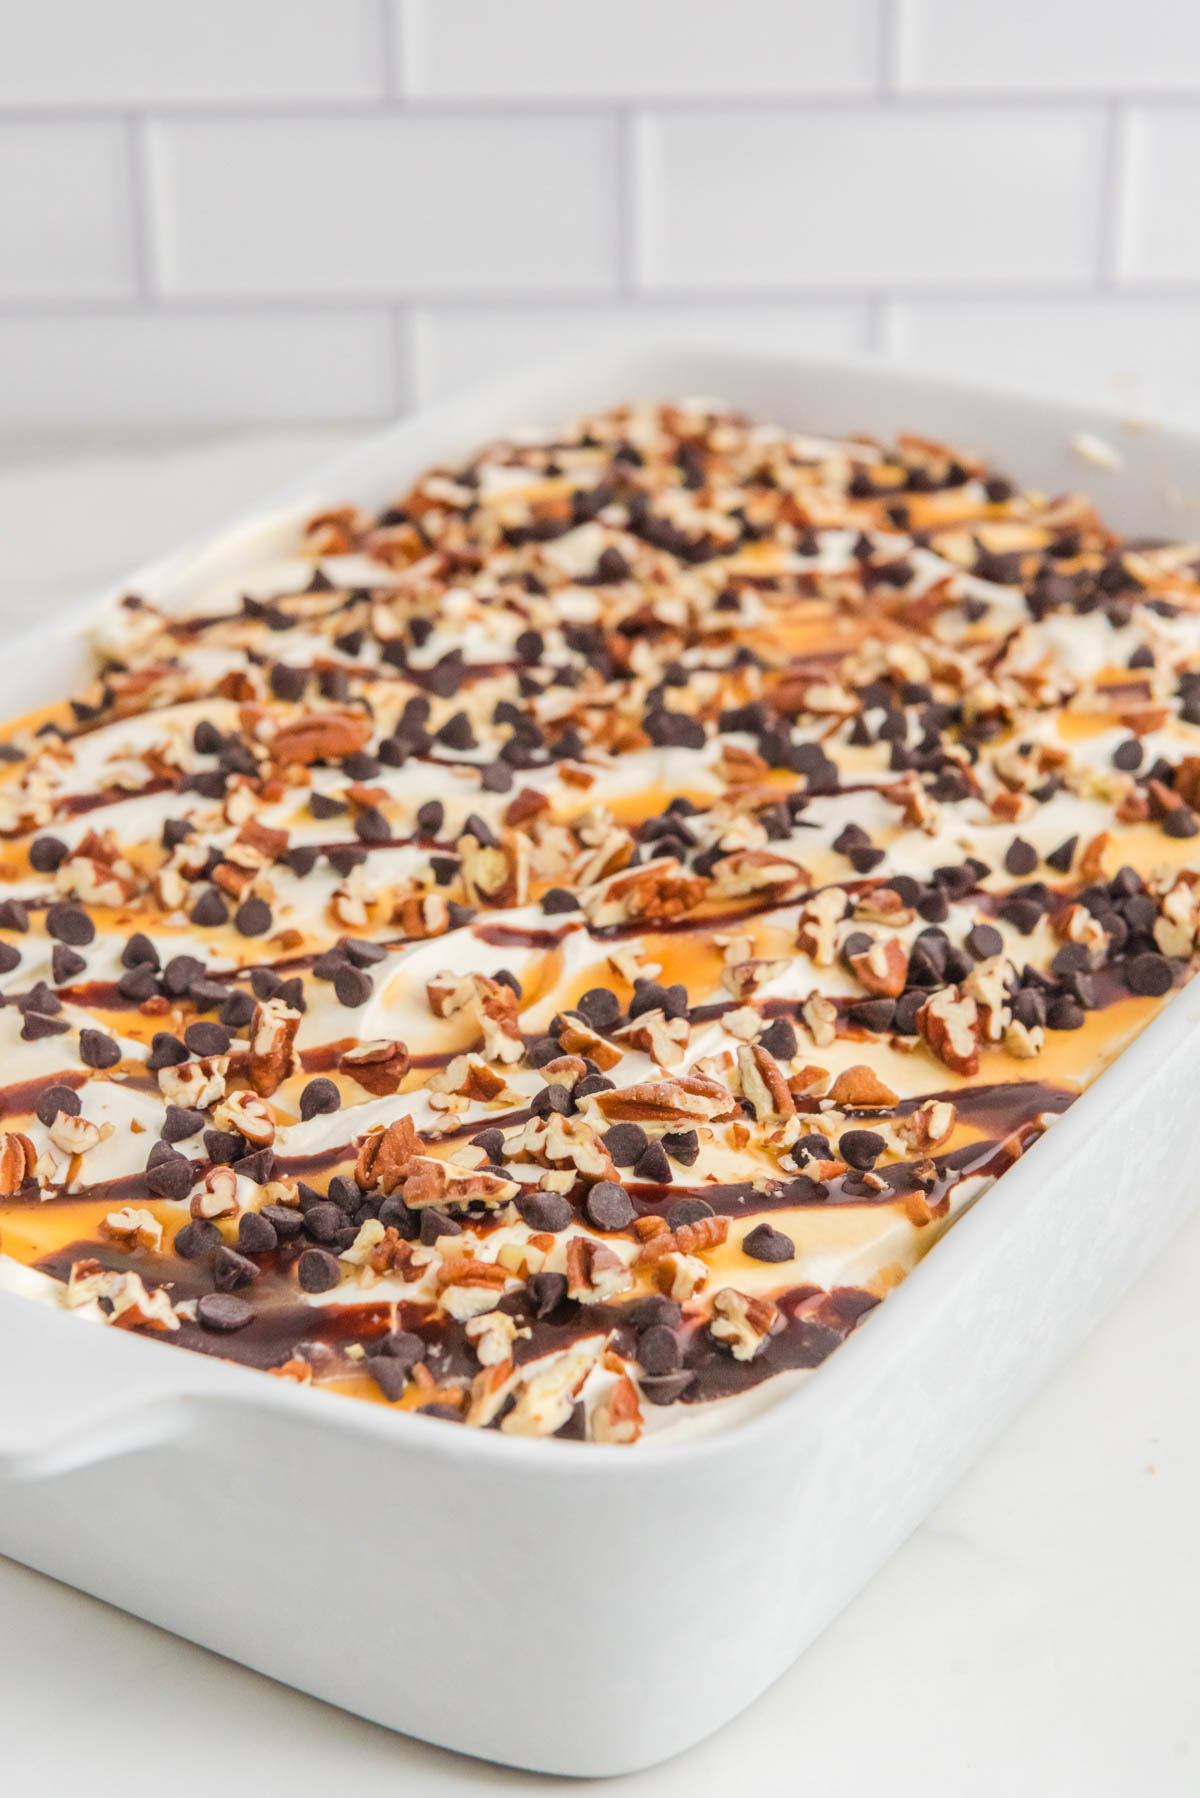 An ice cream cake with chocolate and pecans on top.